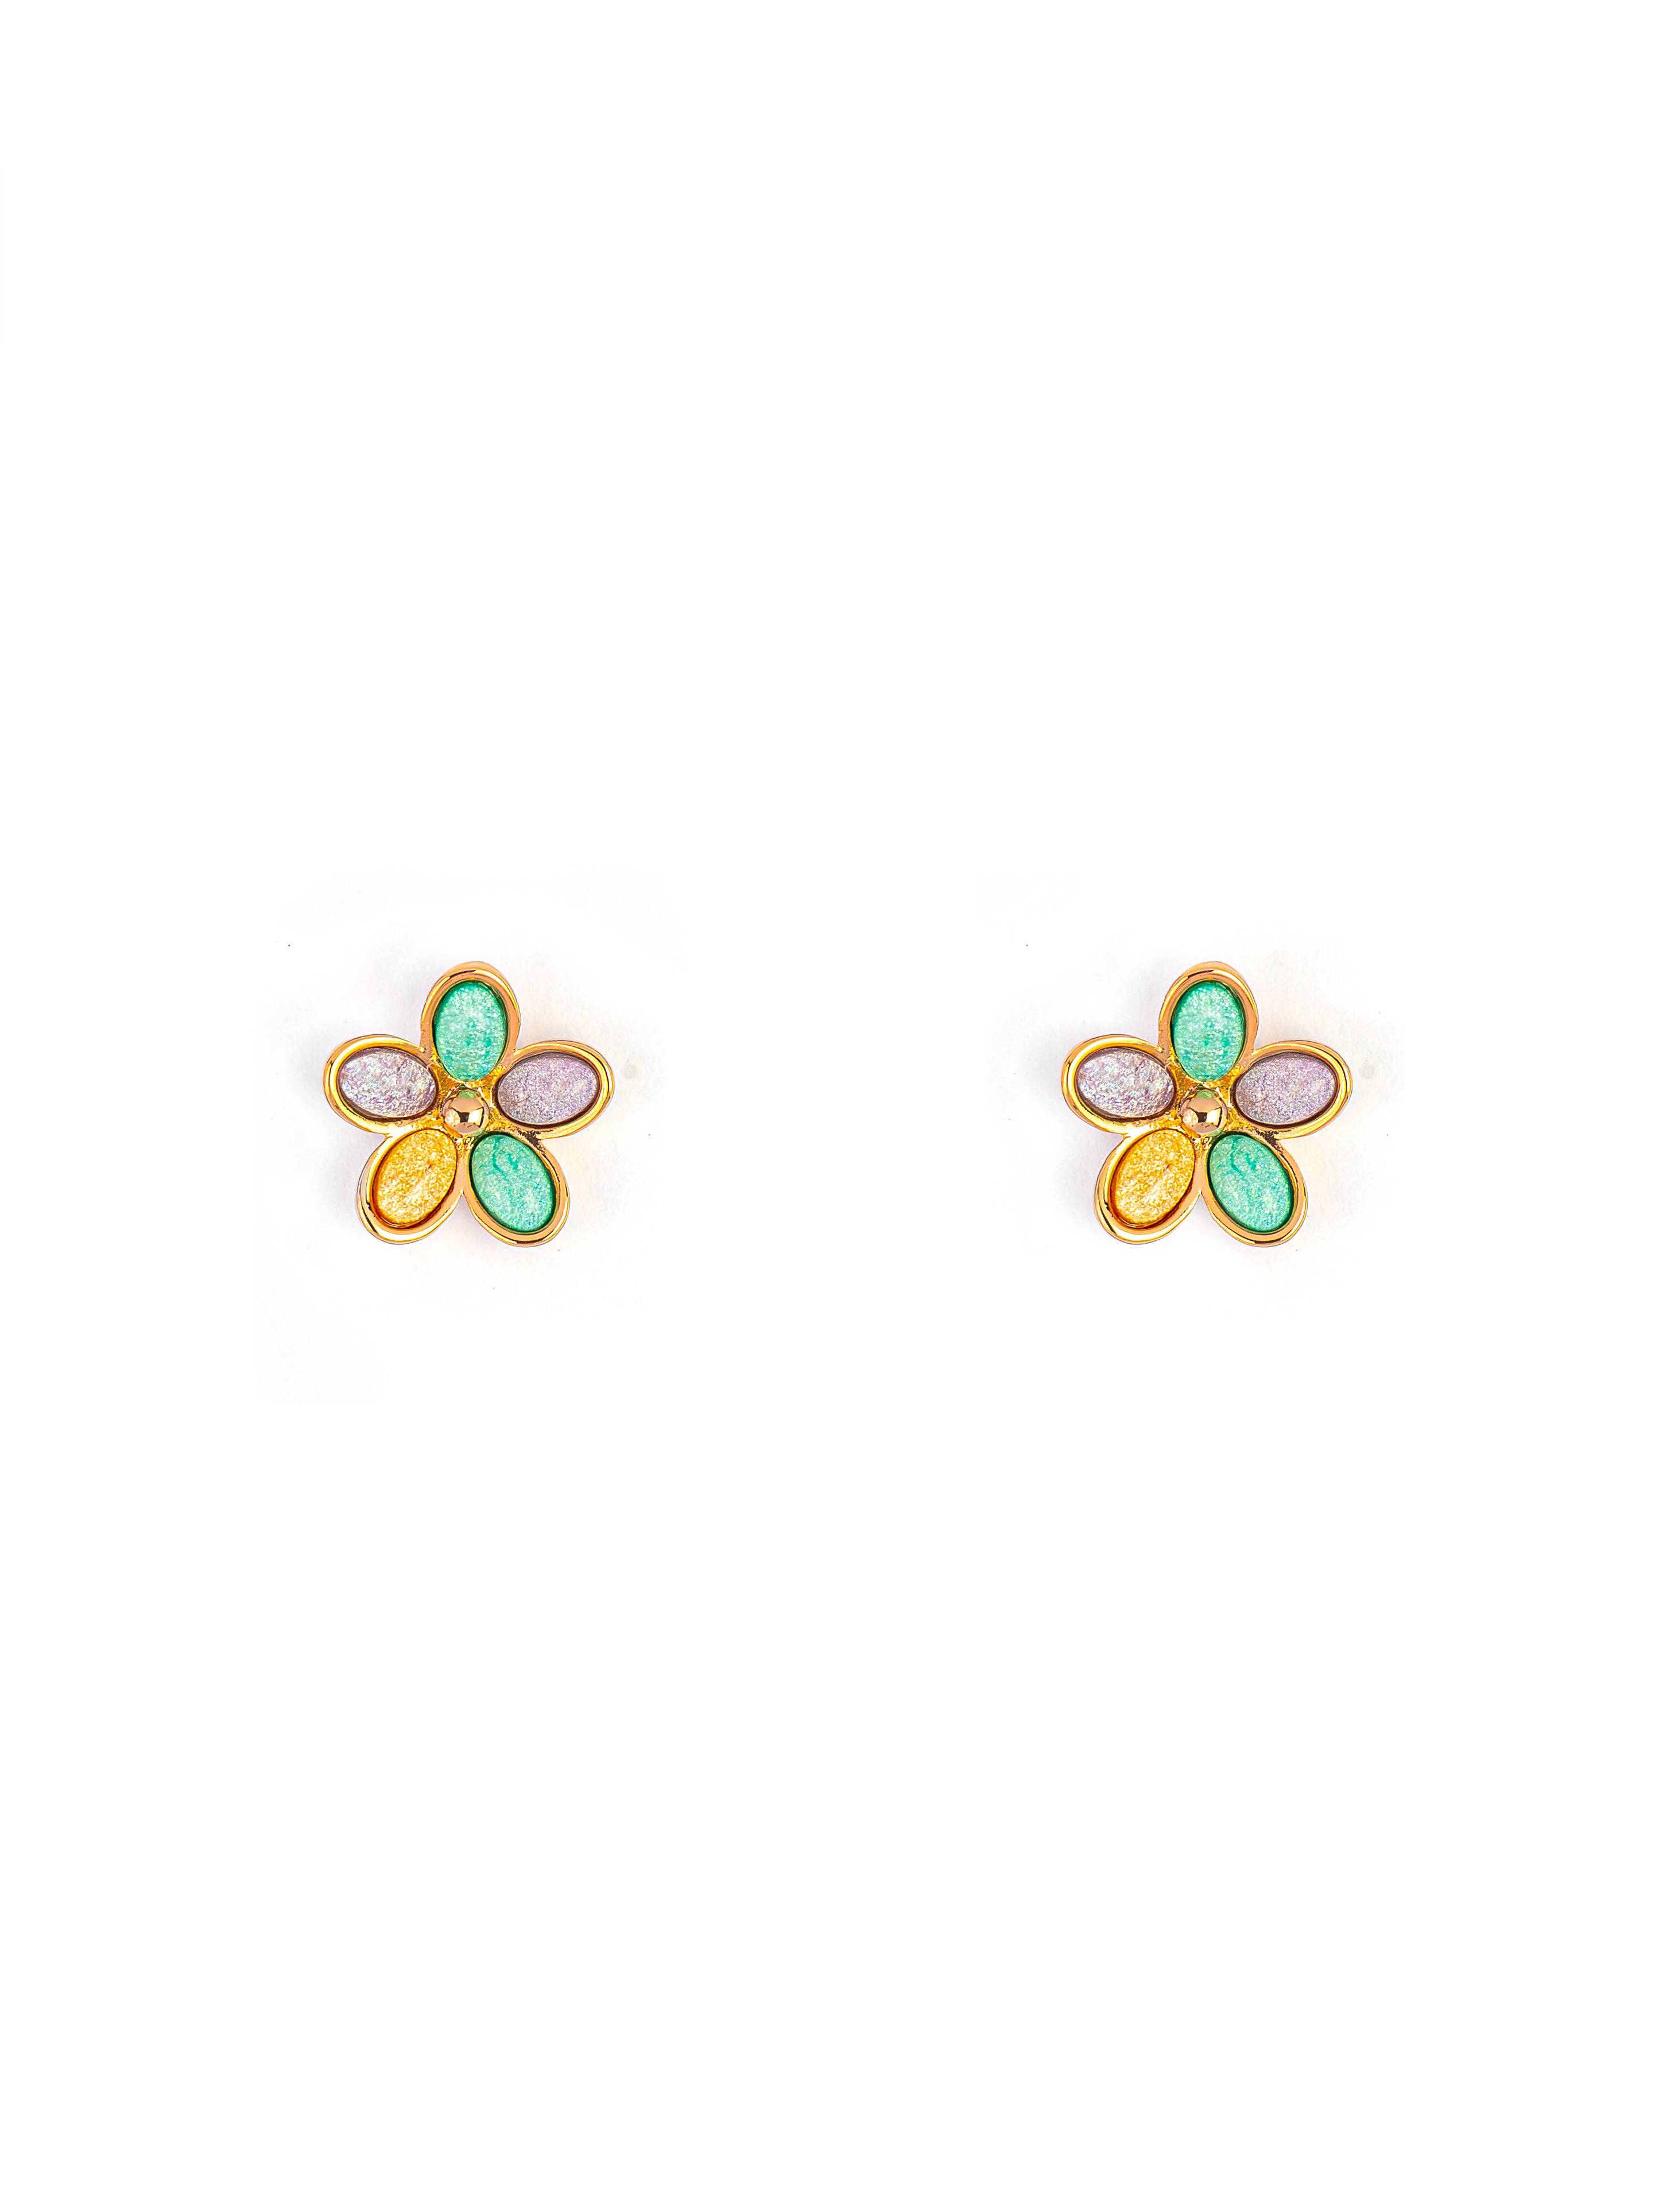 Blooms- Flora Stud Earrings - Earring Studs - Forest Jewelry - Naiise